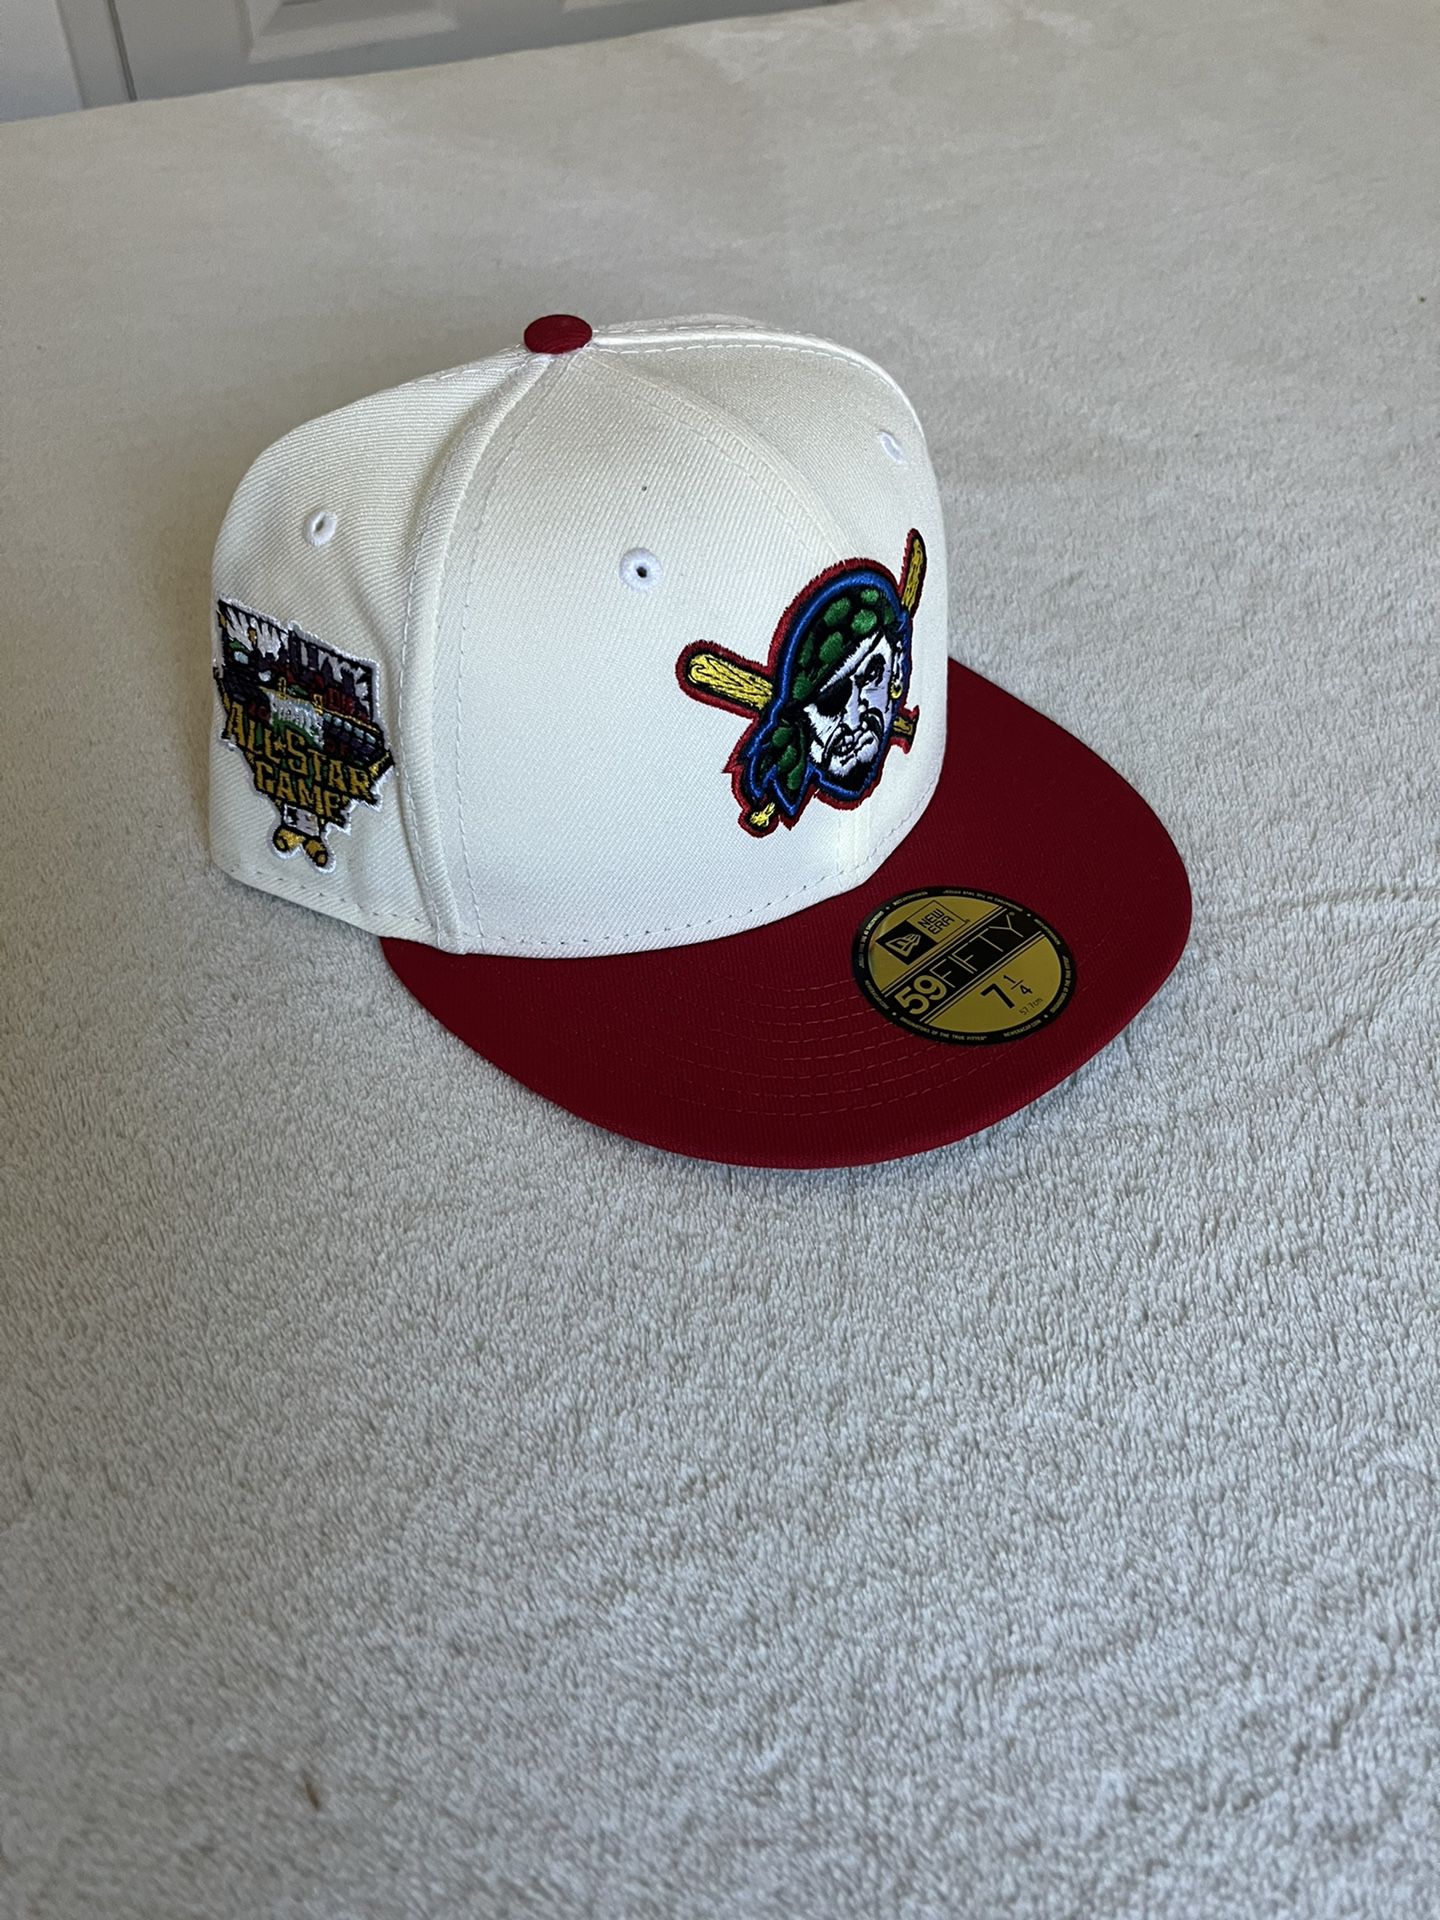 Hat Club Lost Aux Pack Mac Miller Pirates Fitted 2006 ASG